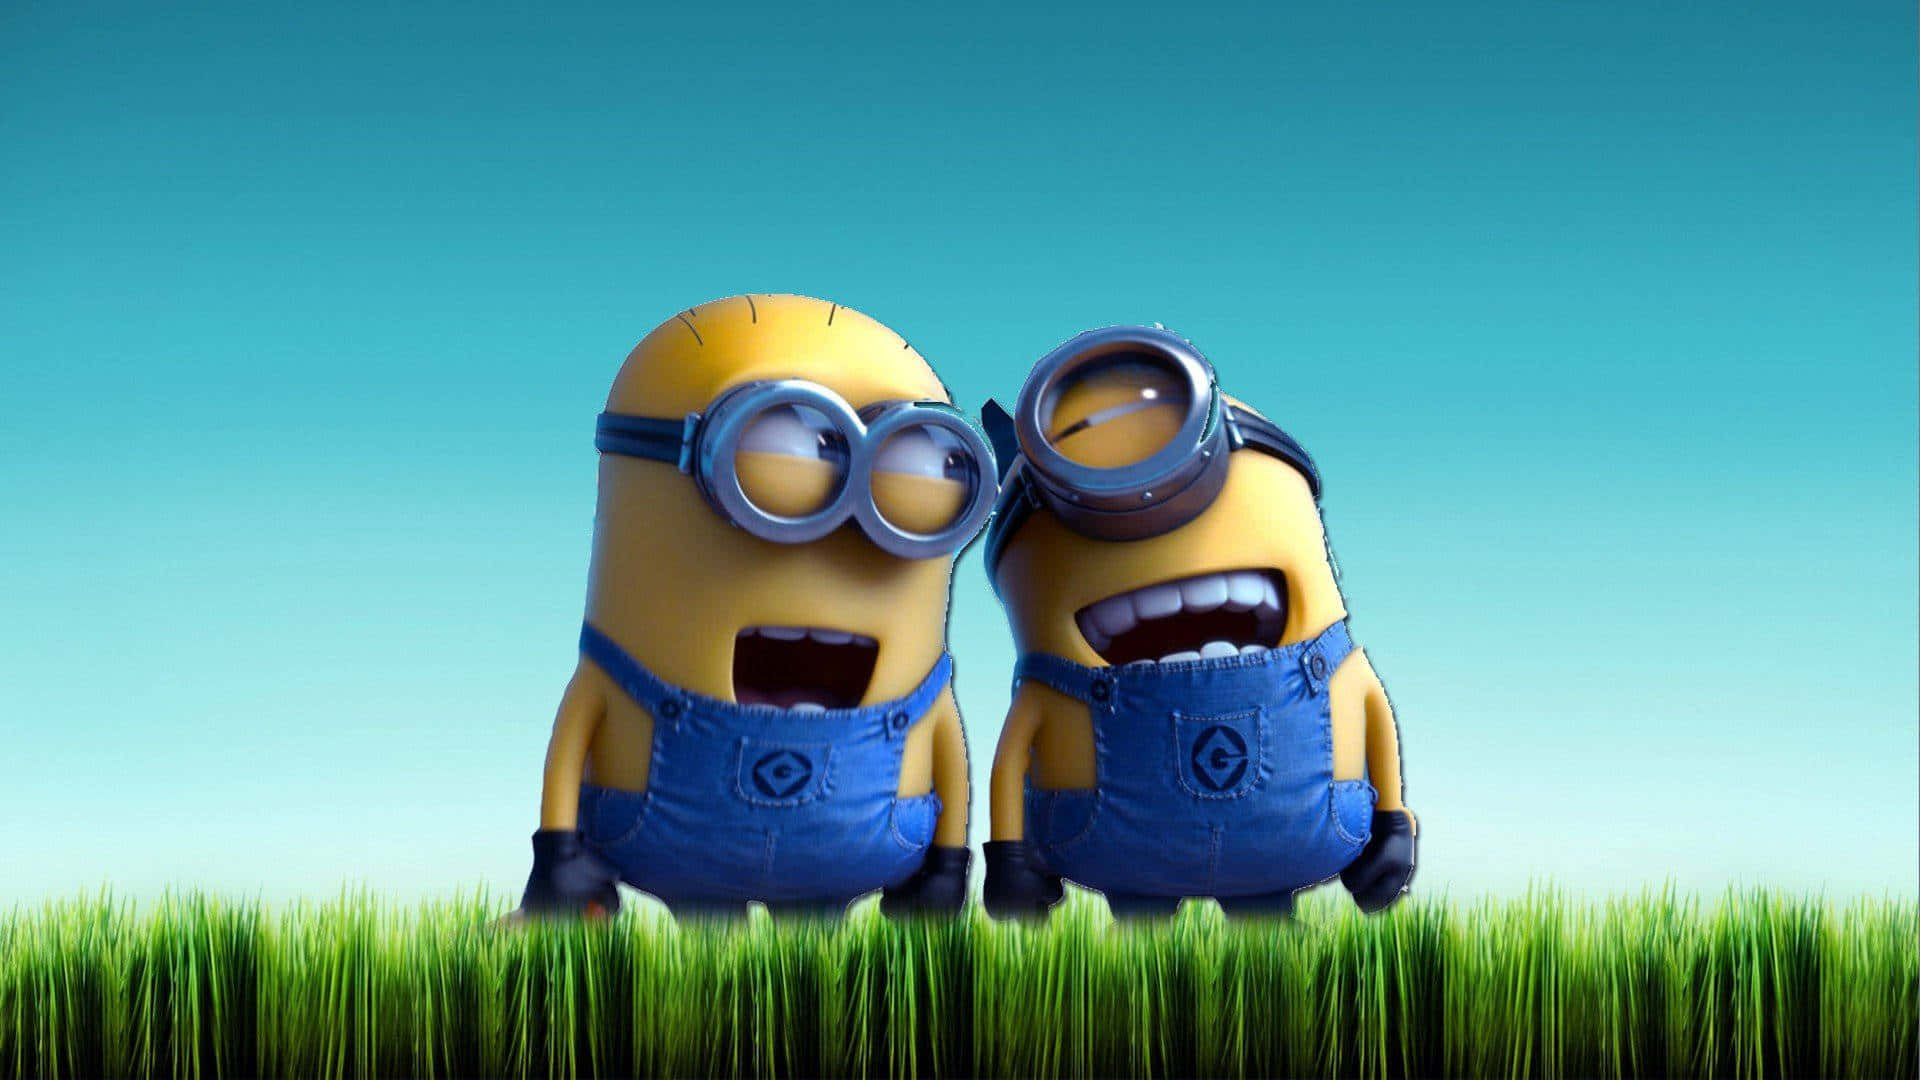 Two Minions Standing In The Grass Wallpaper